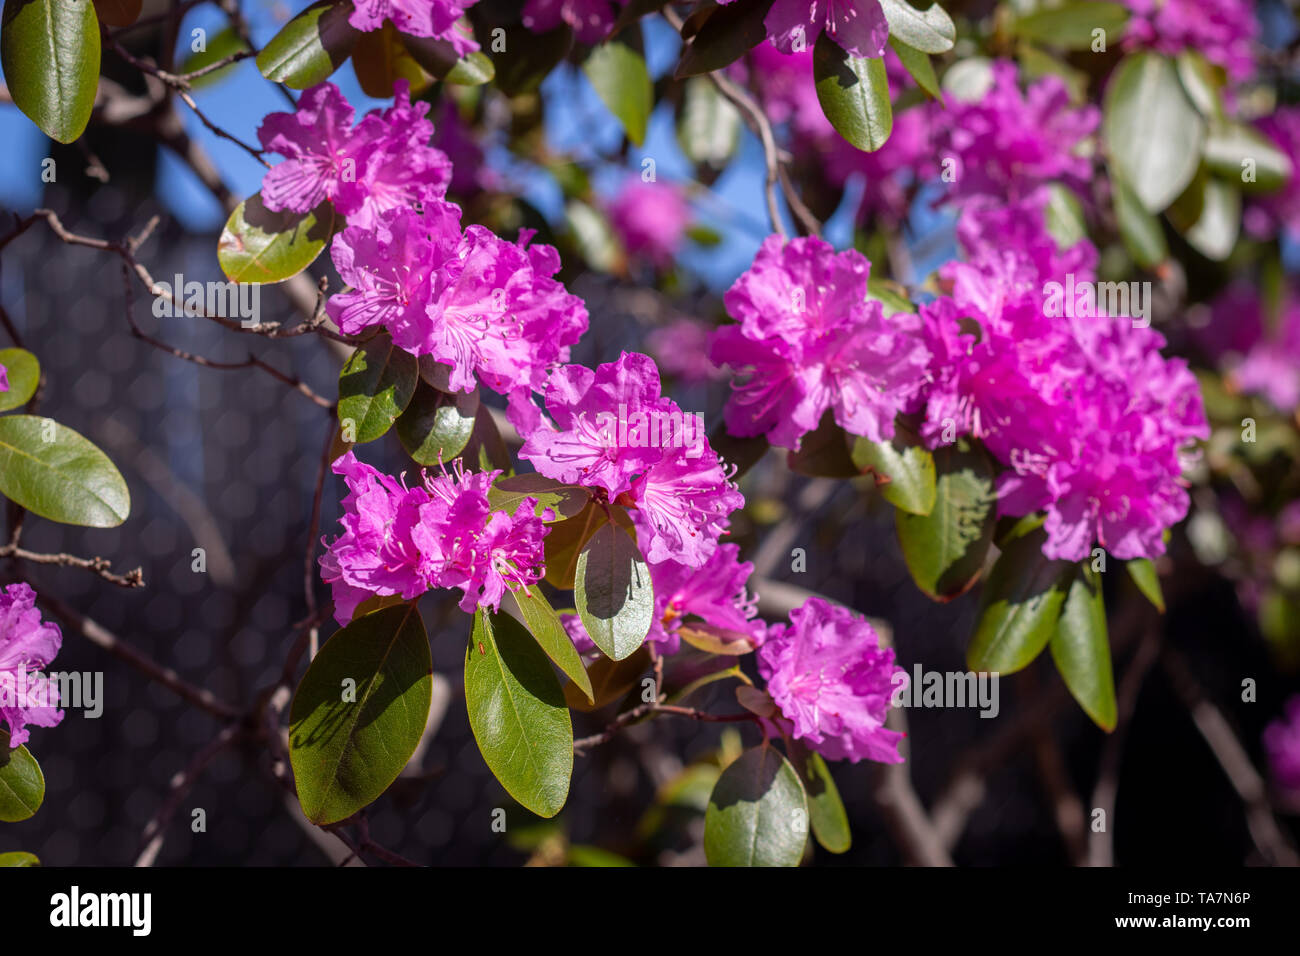 Rhododendron trees woody plants in the heath family closeup at spring full bloom Stock Photo